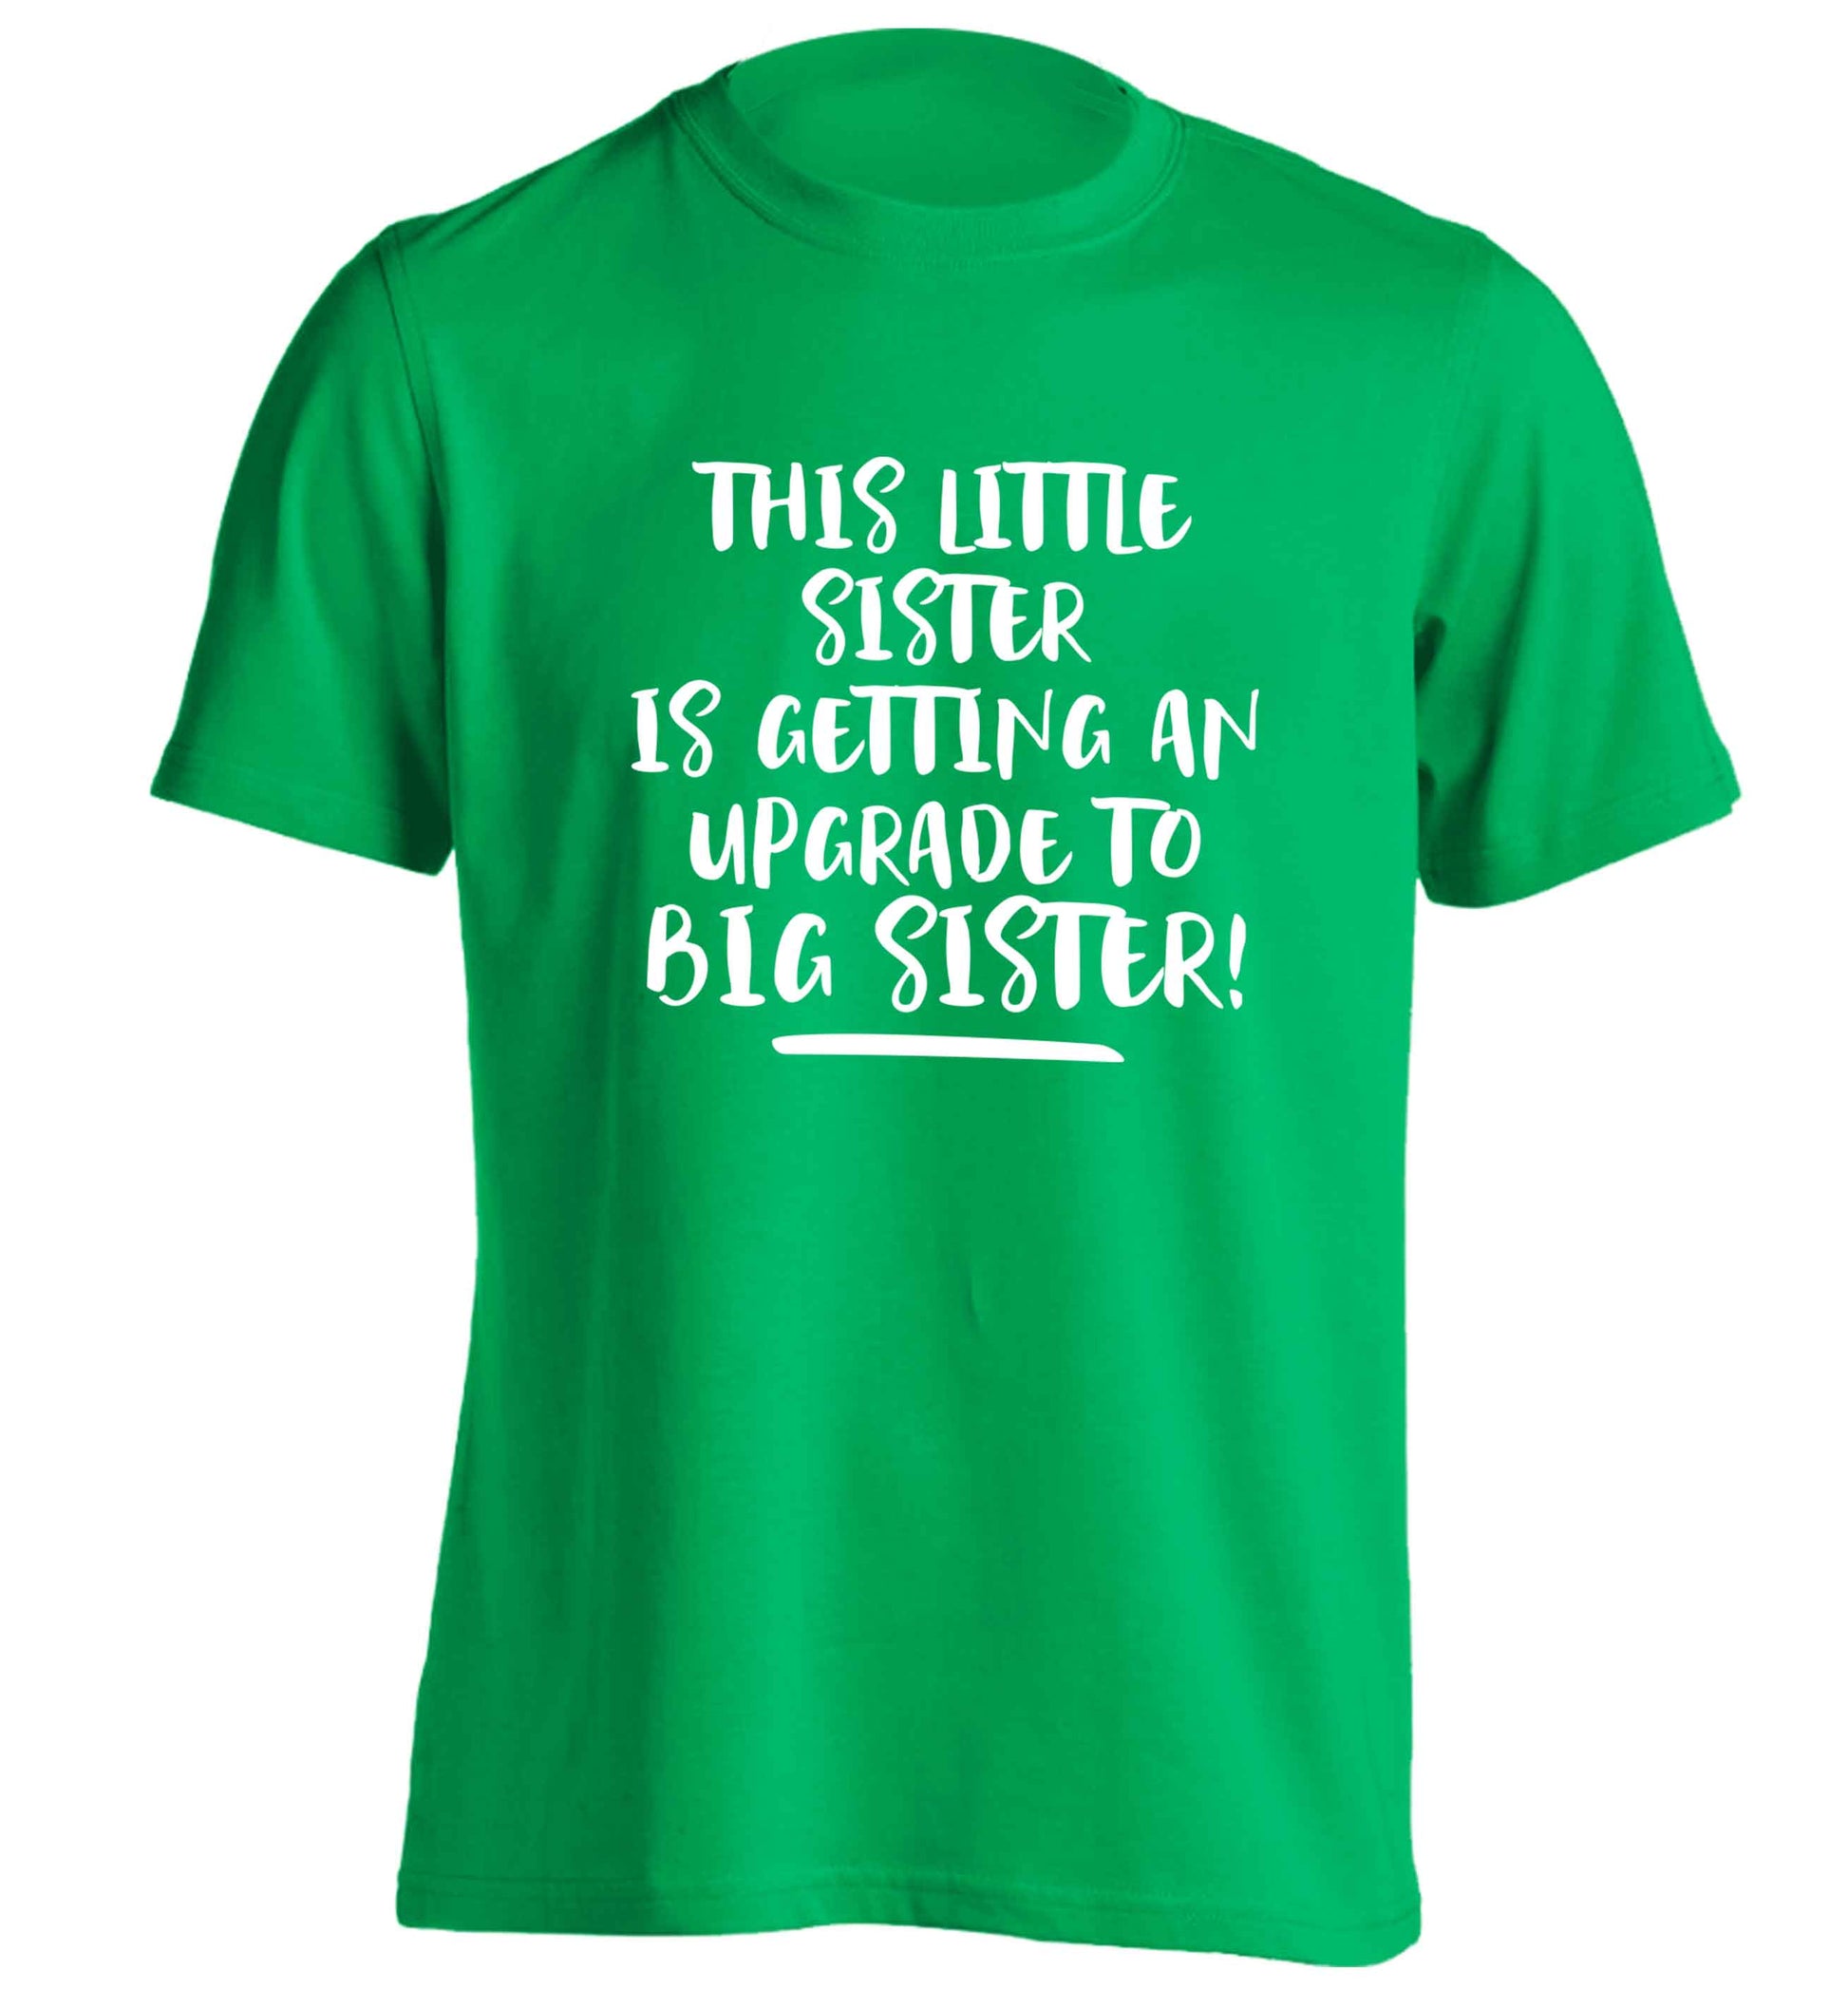 This little sister is getting an upgrade to big sister! adults unisex green Tshirt 2XL